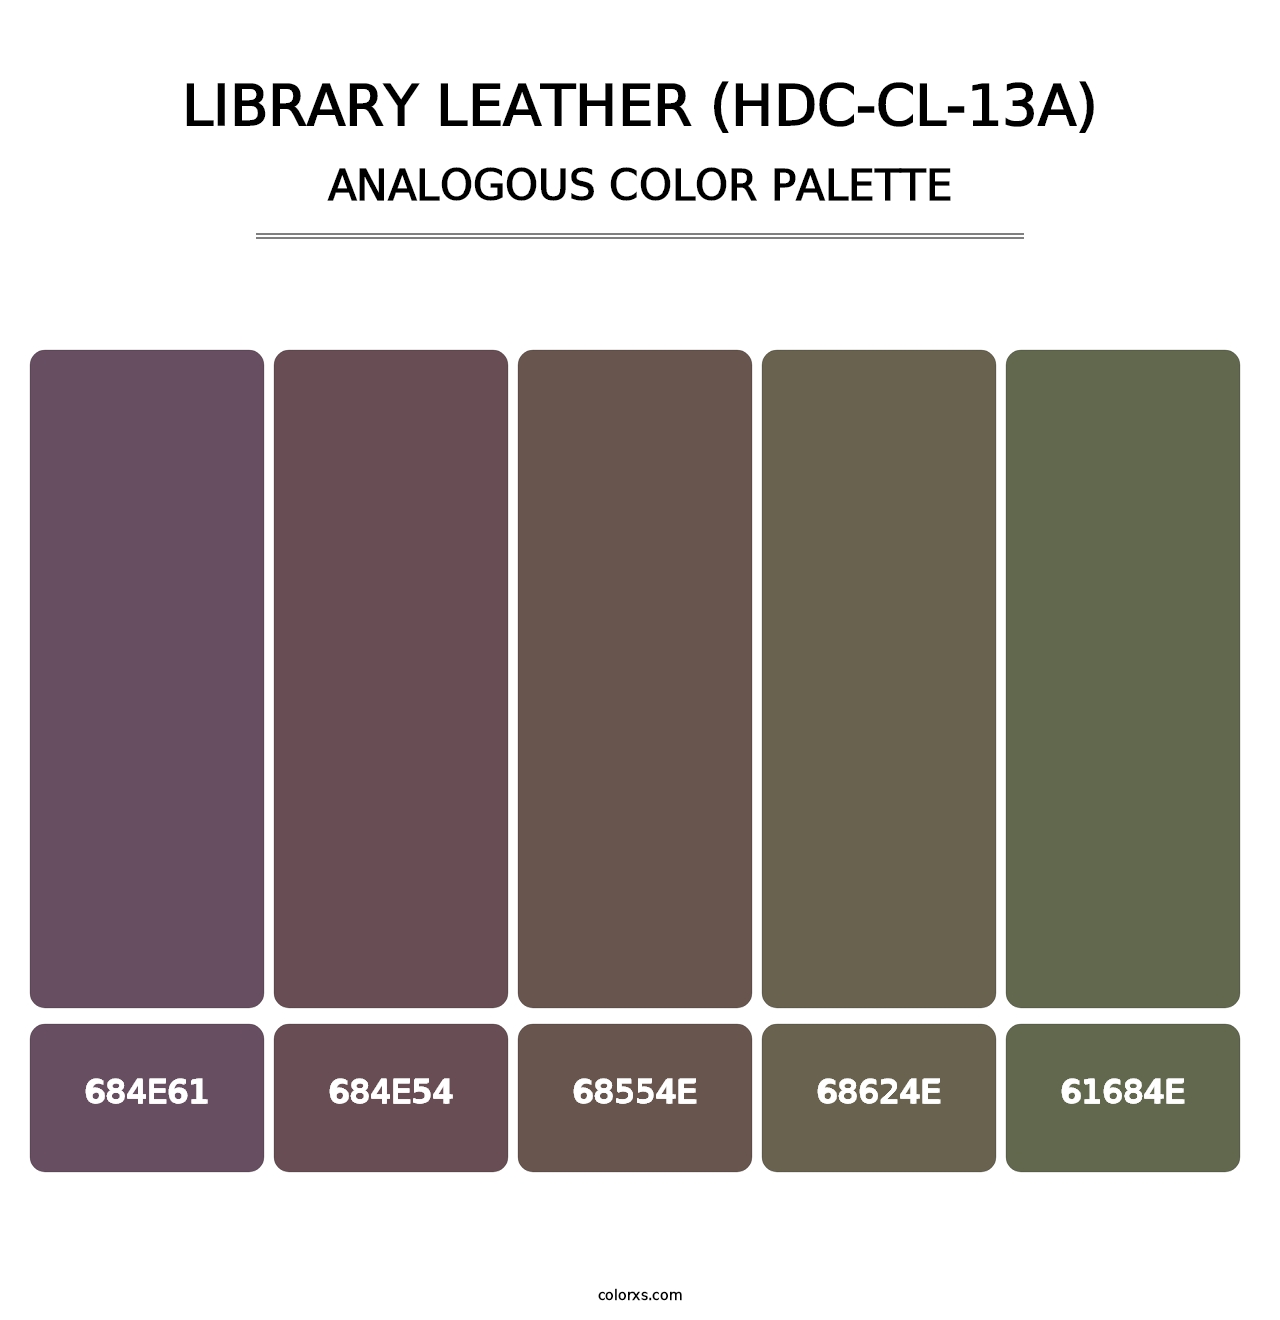 Library Leather (HDC-CL-13A) - Analogous Color Palette